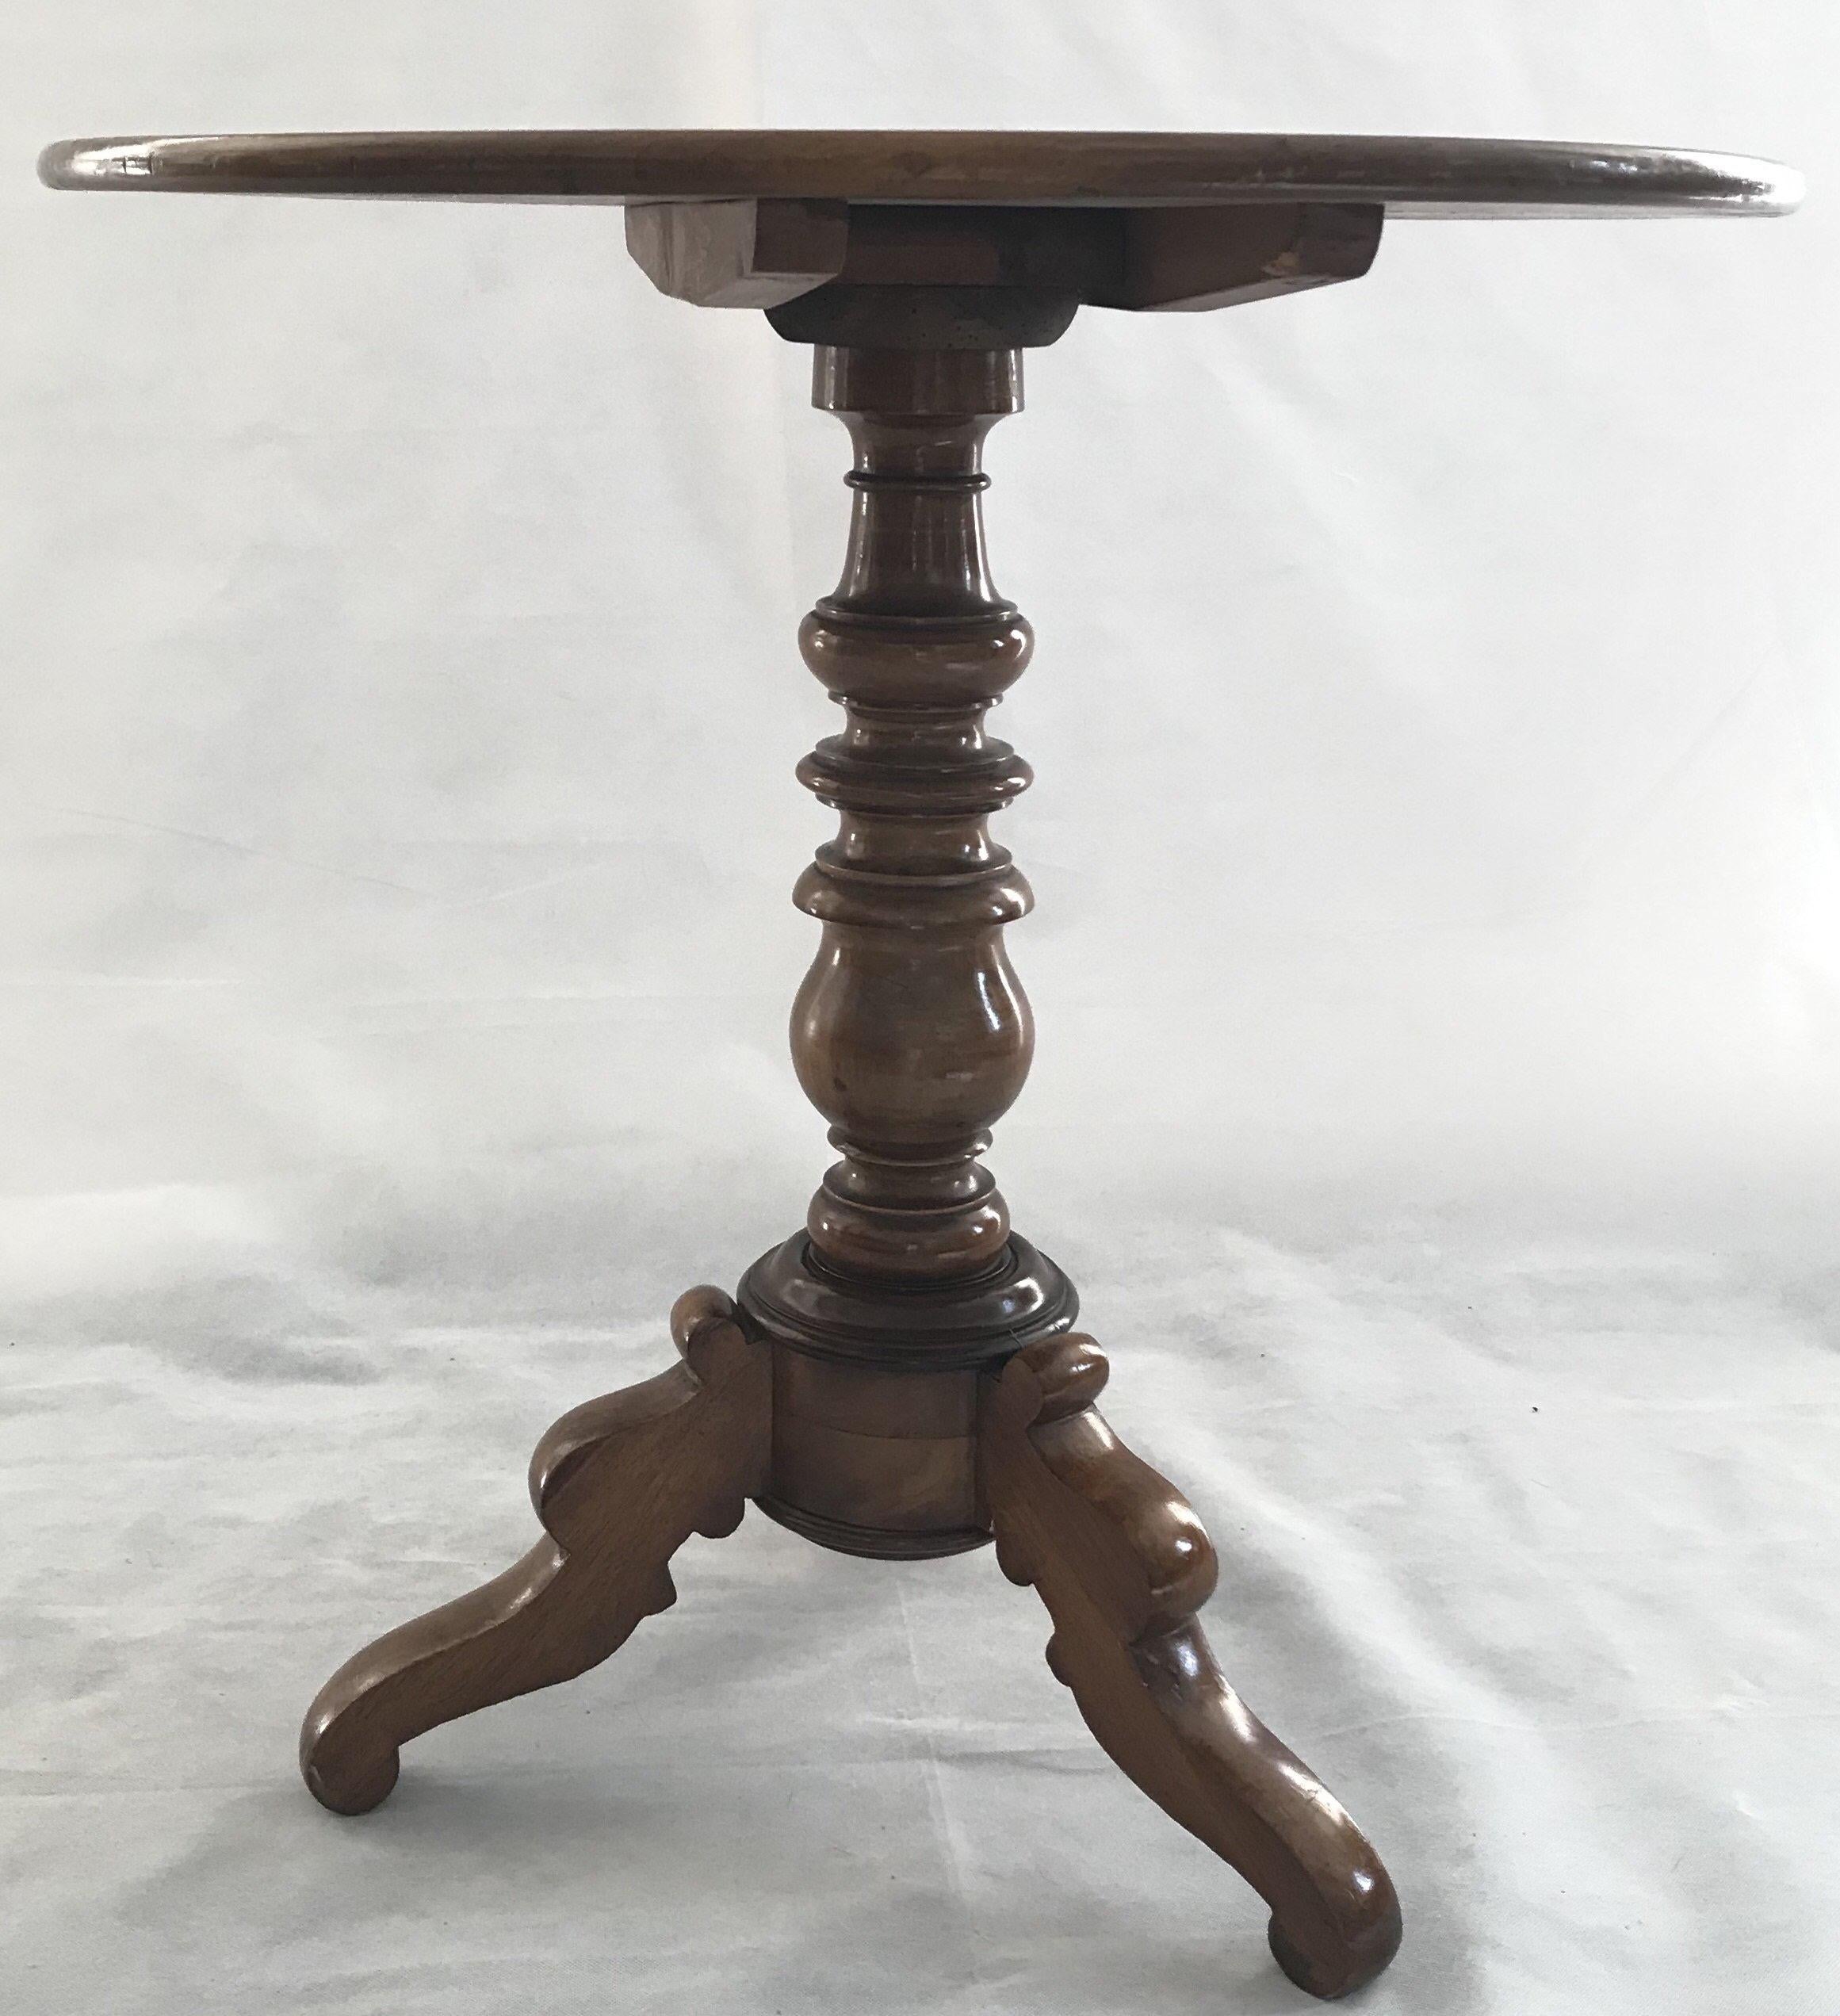 Refined beautifully crafted 19th century French walnut tilt top end table having sumptuously grained walnut, a round top with molded rail, finely carved and turned pedestal with spindled cage and mounted tilting mechanism. The entire affair is